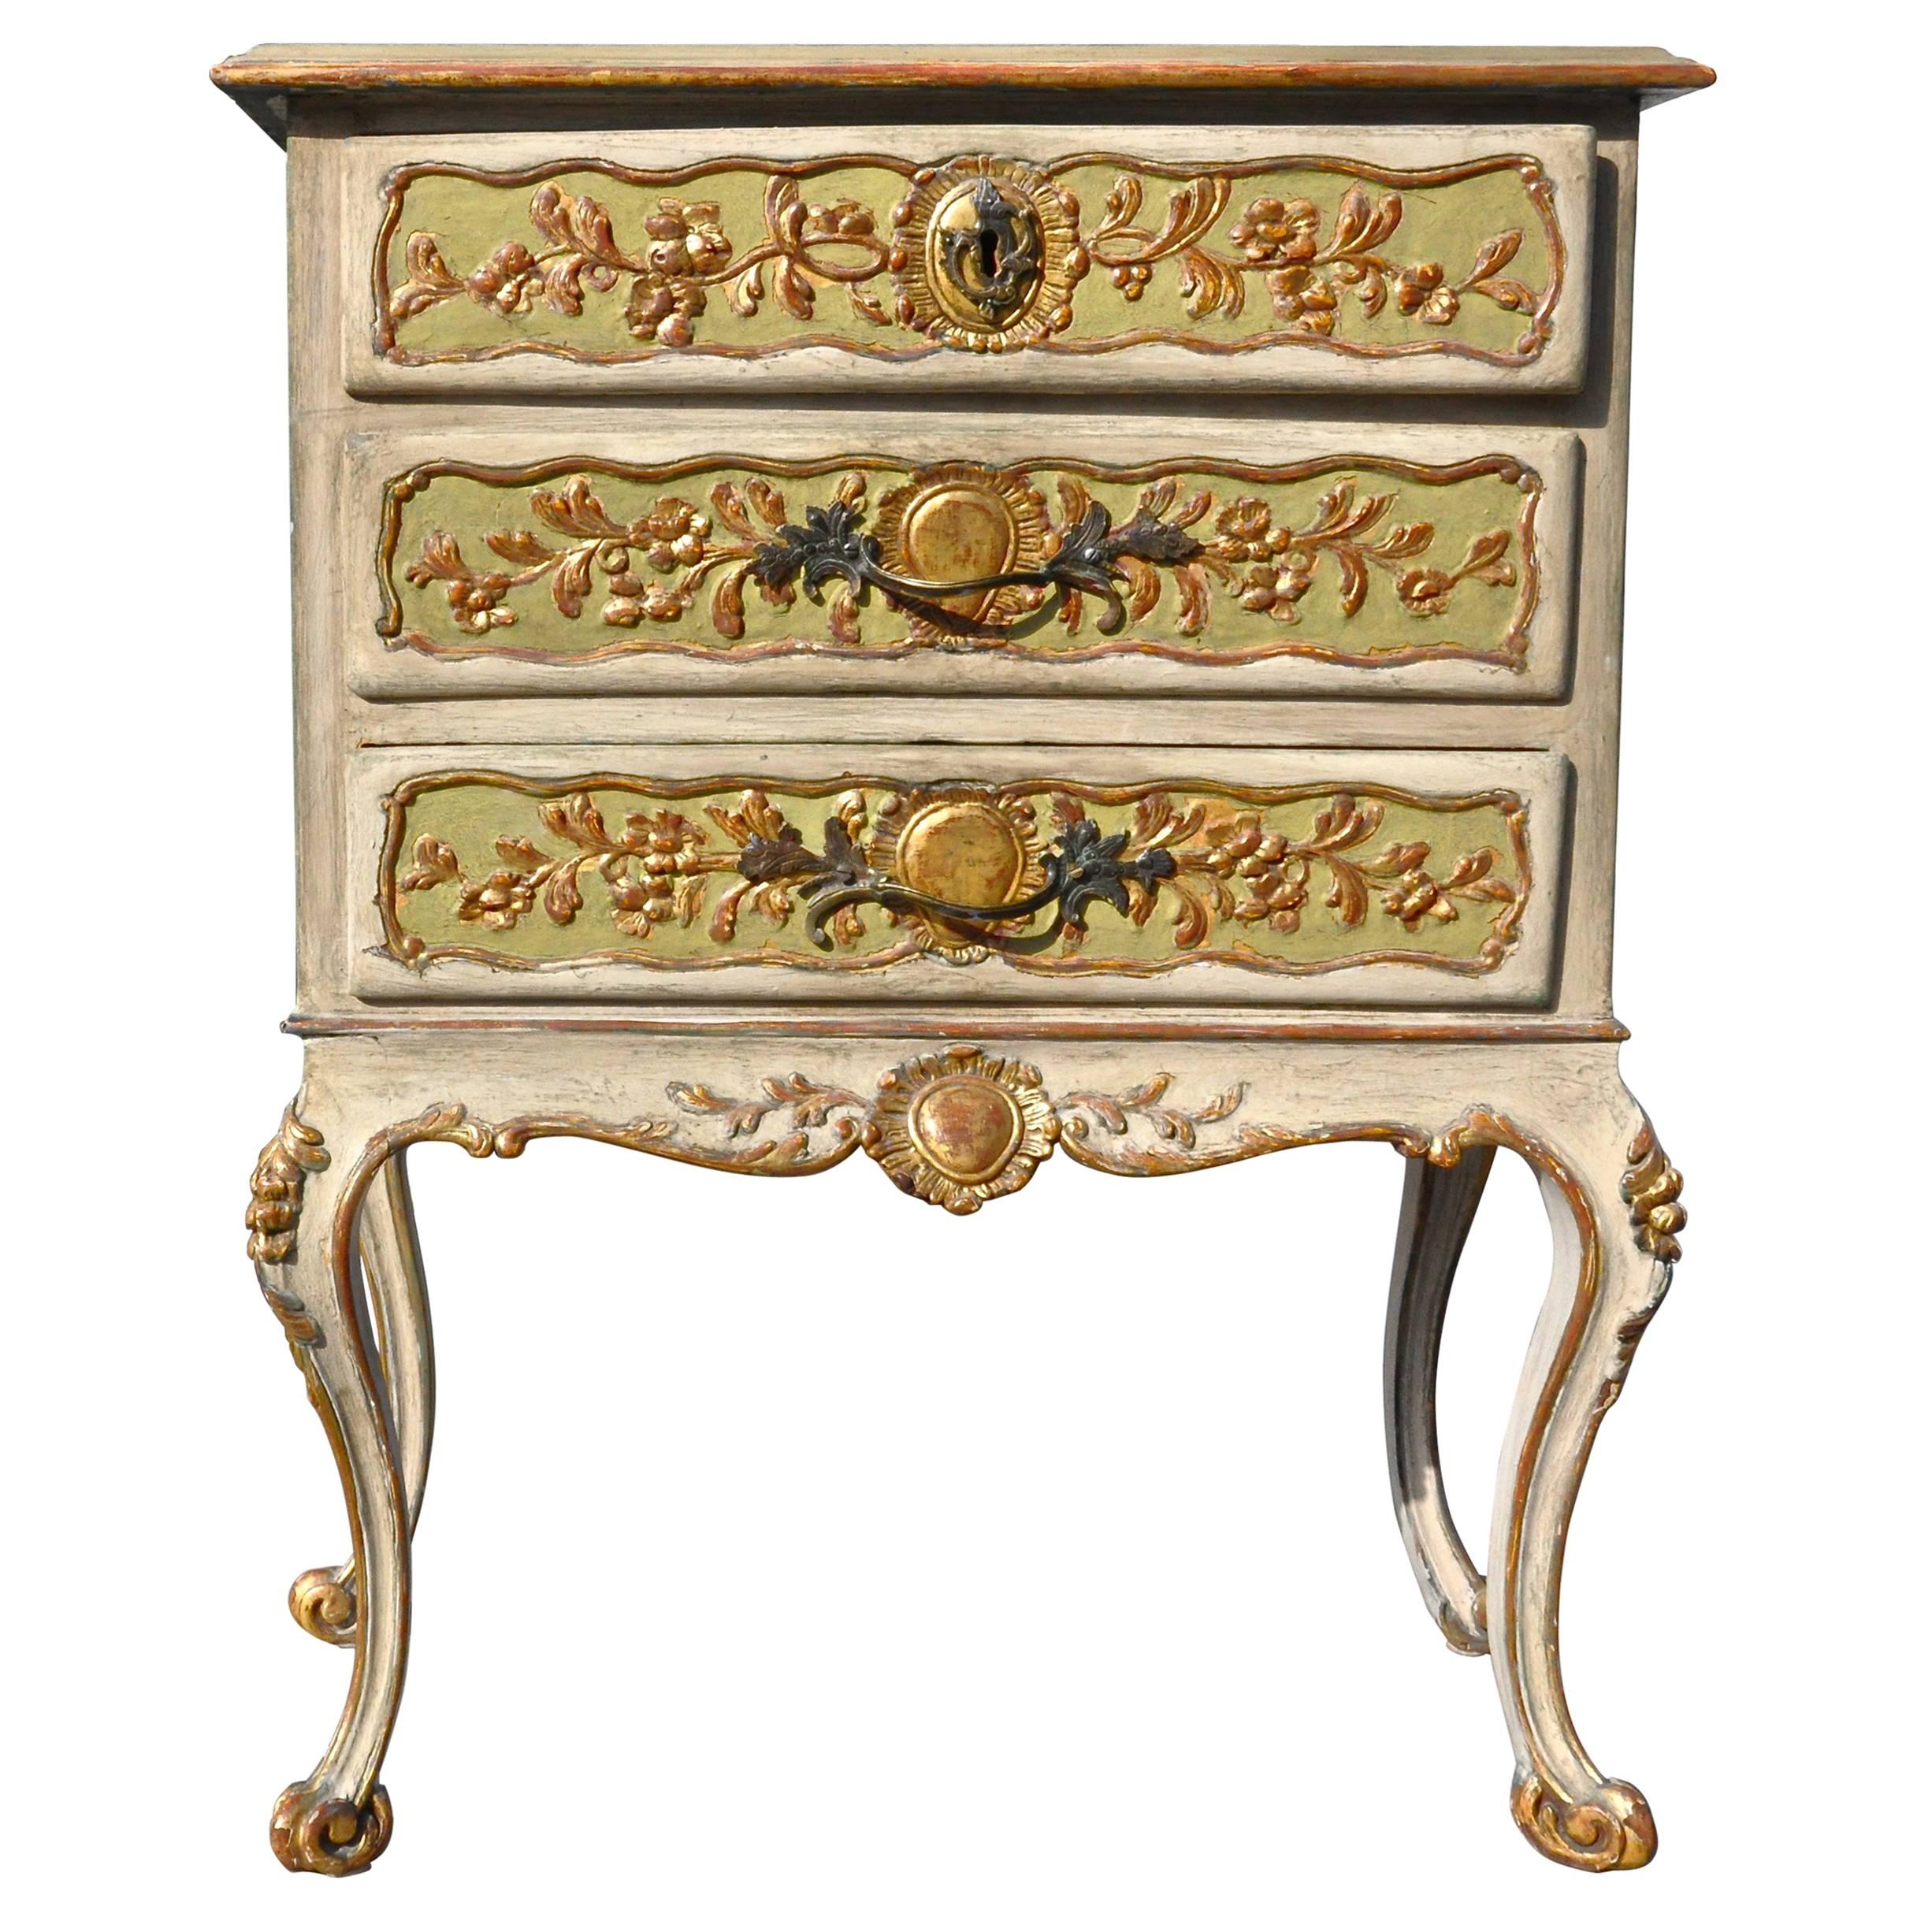 Period German Mid-18th Century Neoclassical Painted Commode For Sale